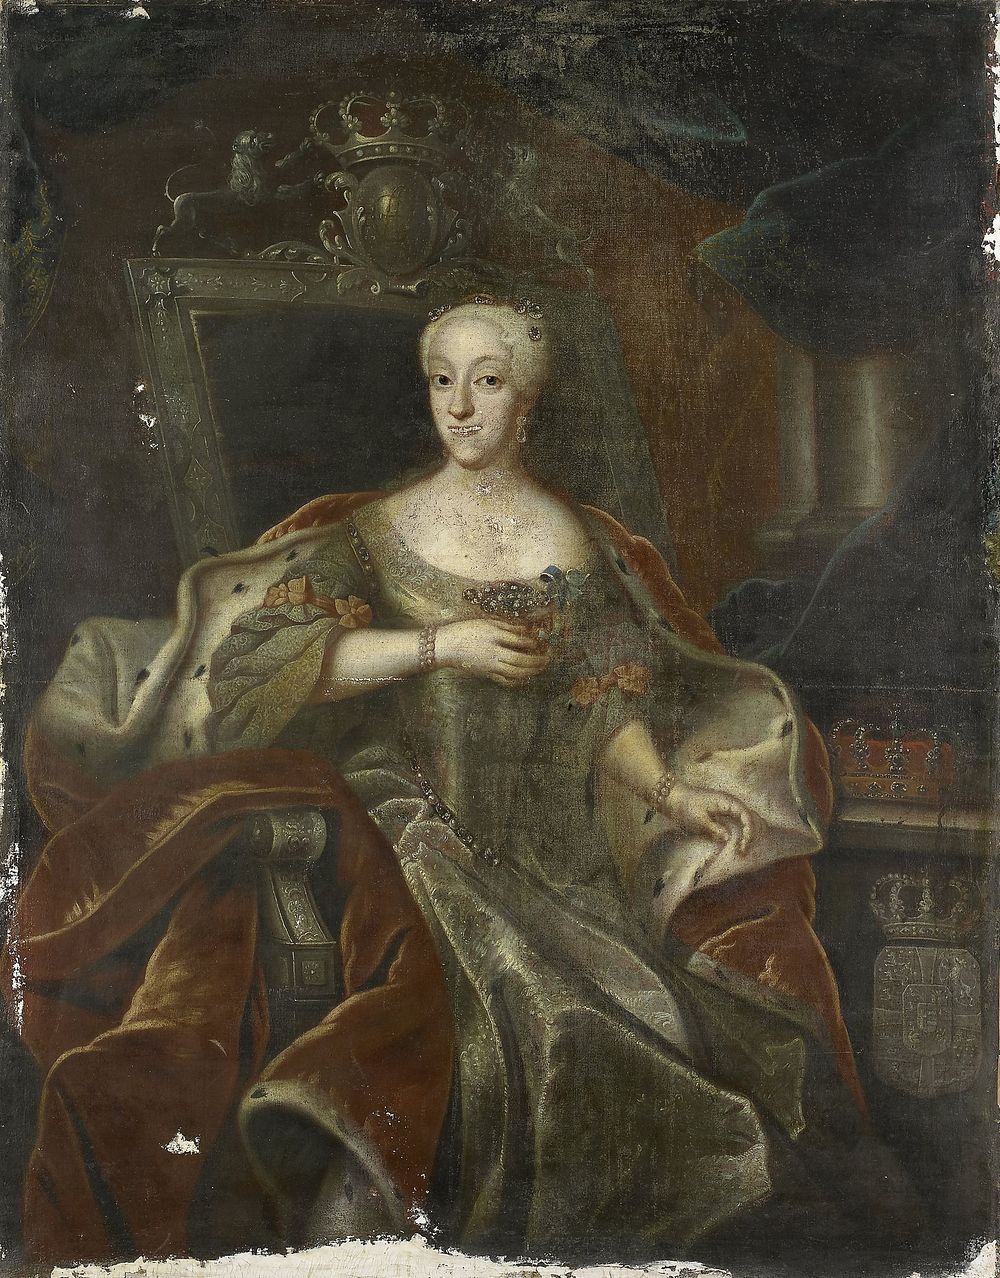 Portrait of Princess Charlotte Amalie, Daughter of Frederick IV, King of Denmark (1755 - 1765) by anonymous